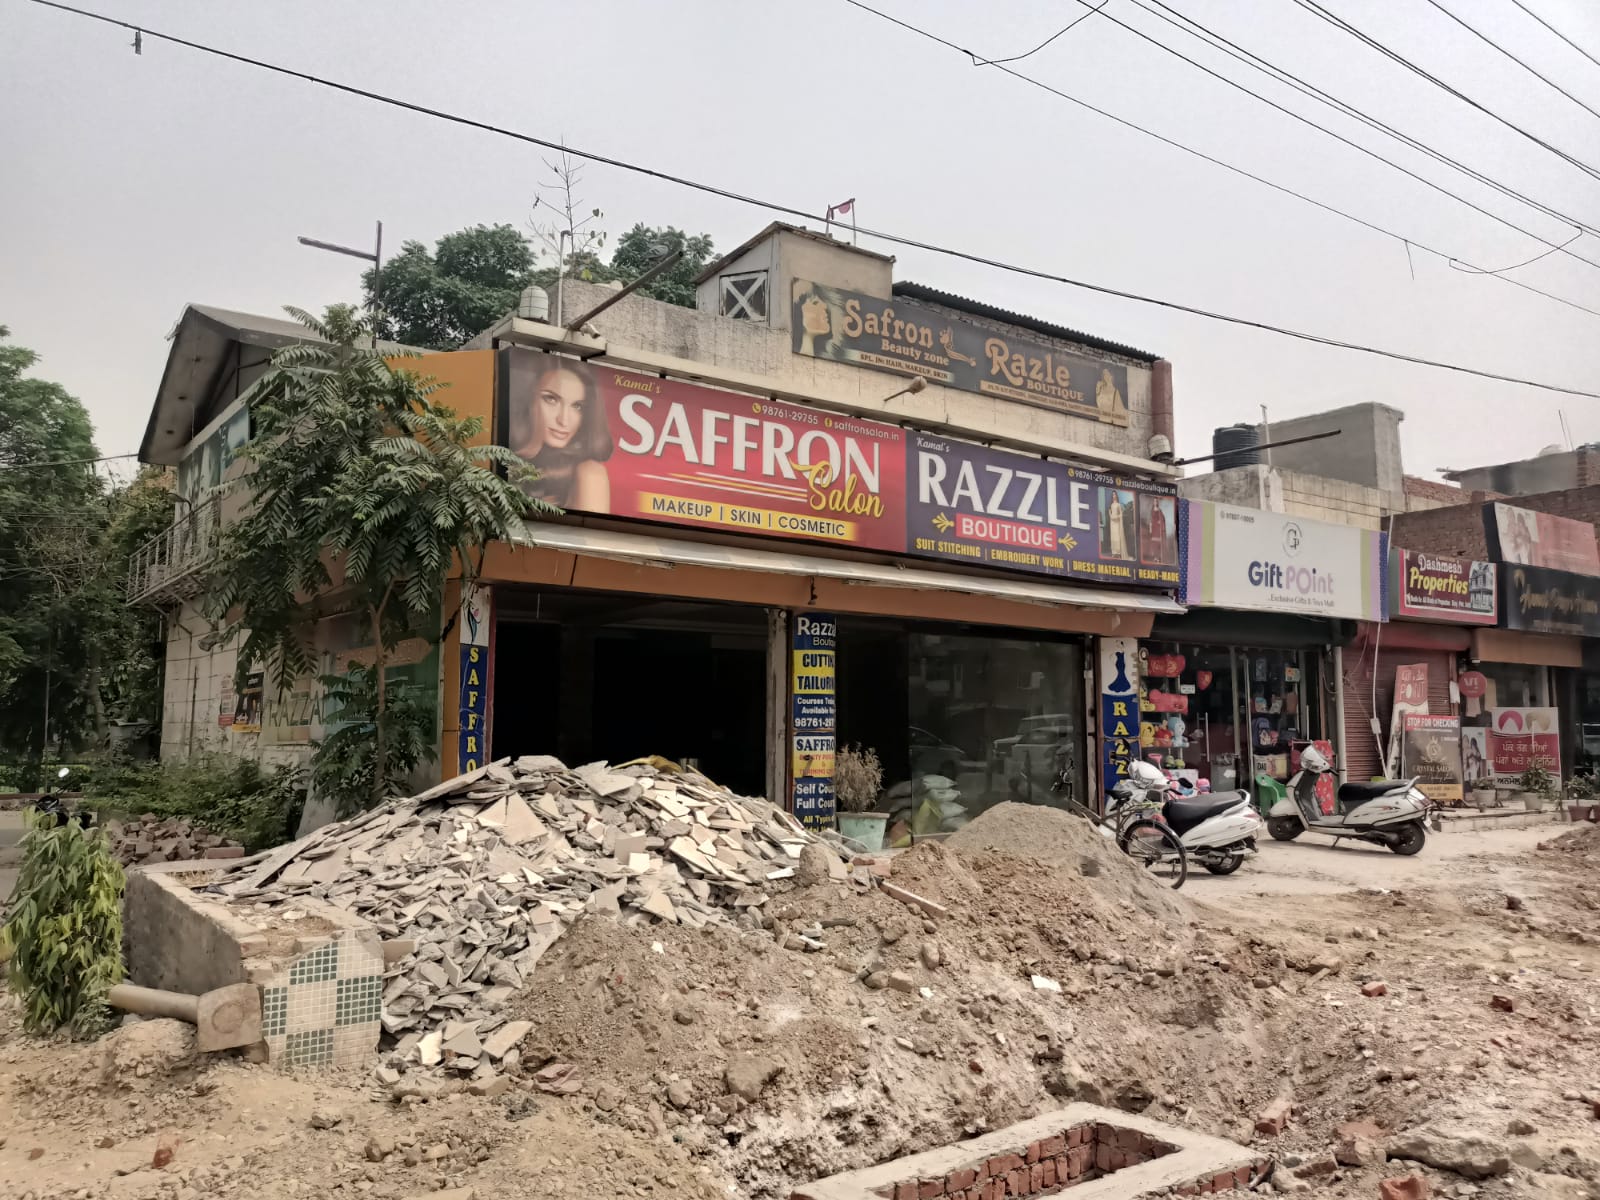 Commercial use of LIG flats in Dugri continues unabated, GLADA in slumber